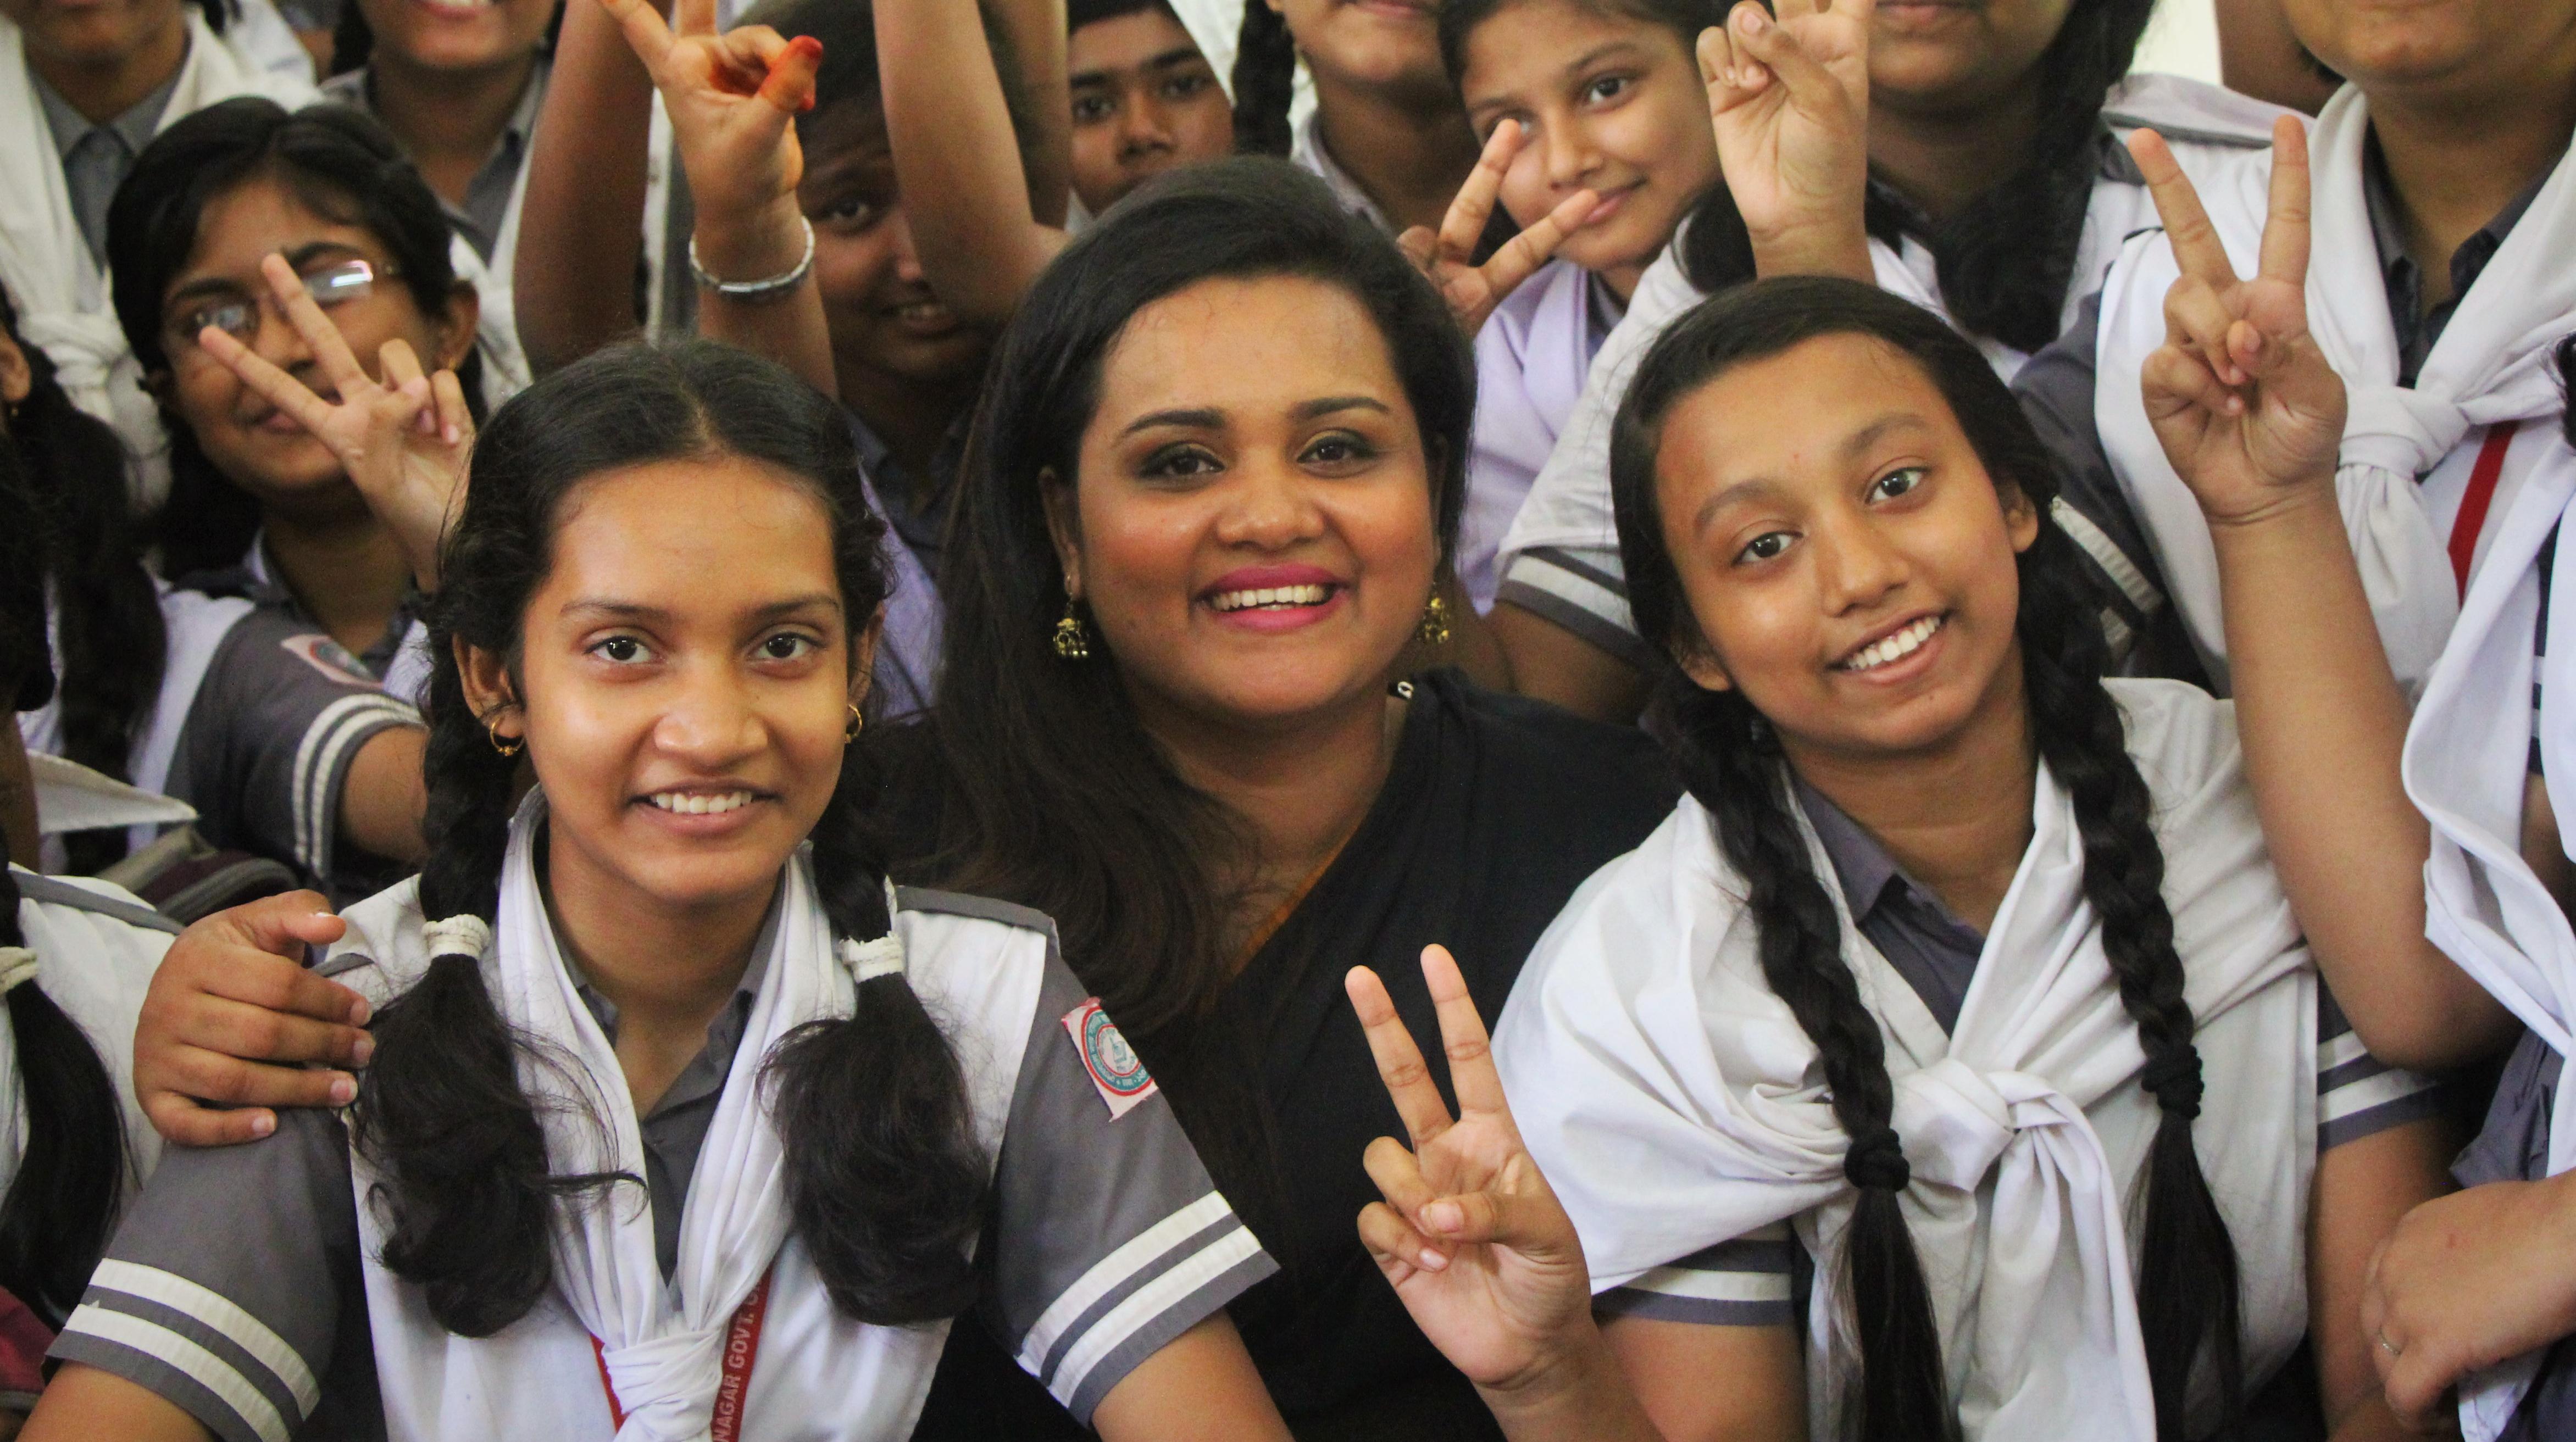 The UN Secretary-General's Envoy on Youth visits a girls school and UNFPA Adolescent Club in Bangladesh, 7 August 2018. Photo credit: UNFPA ​